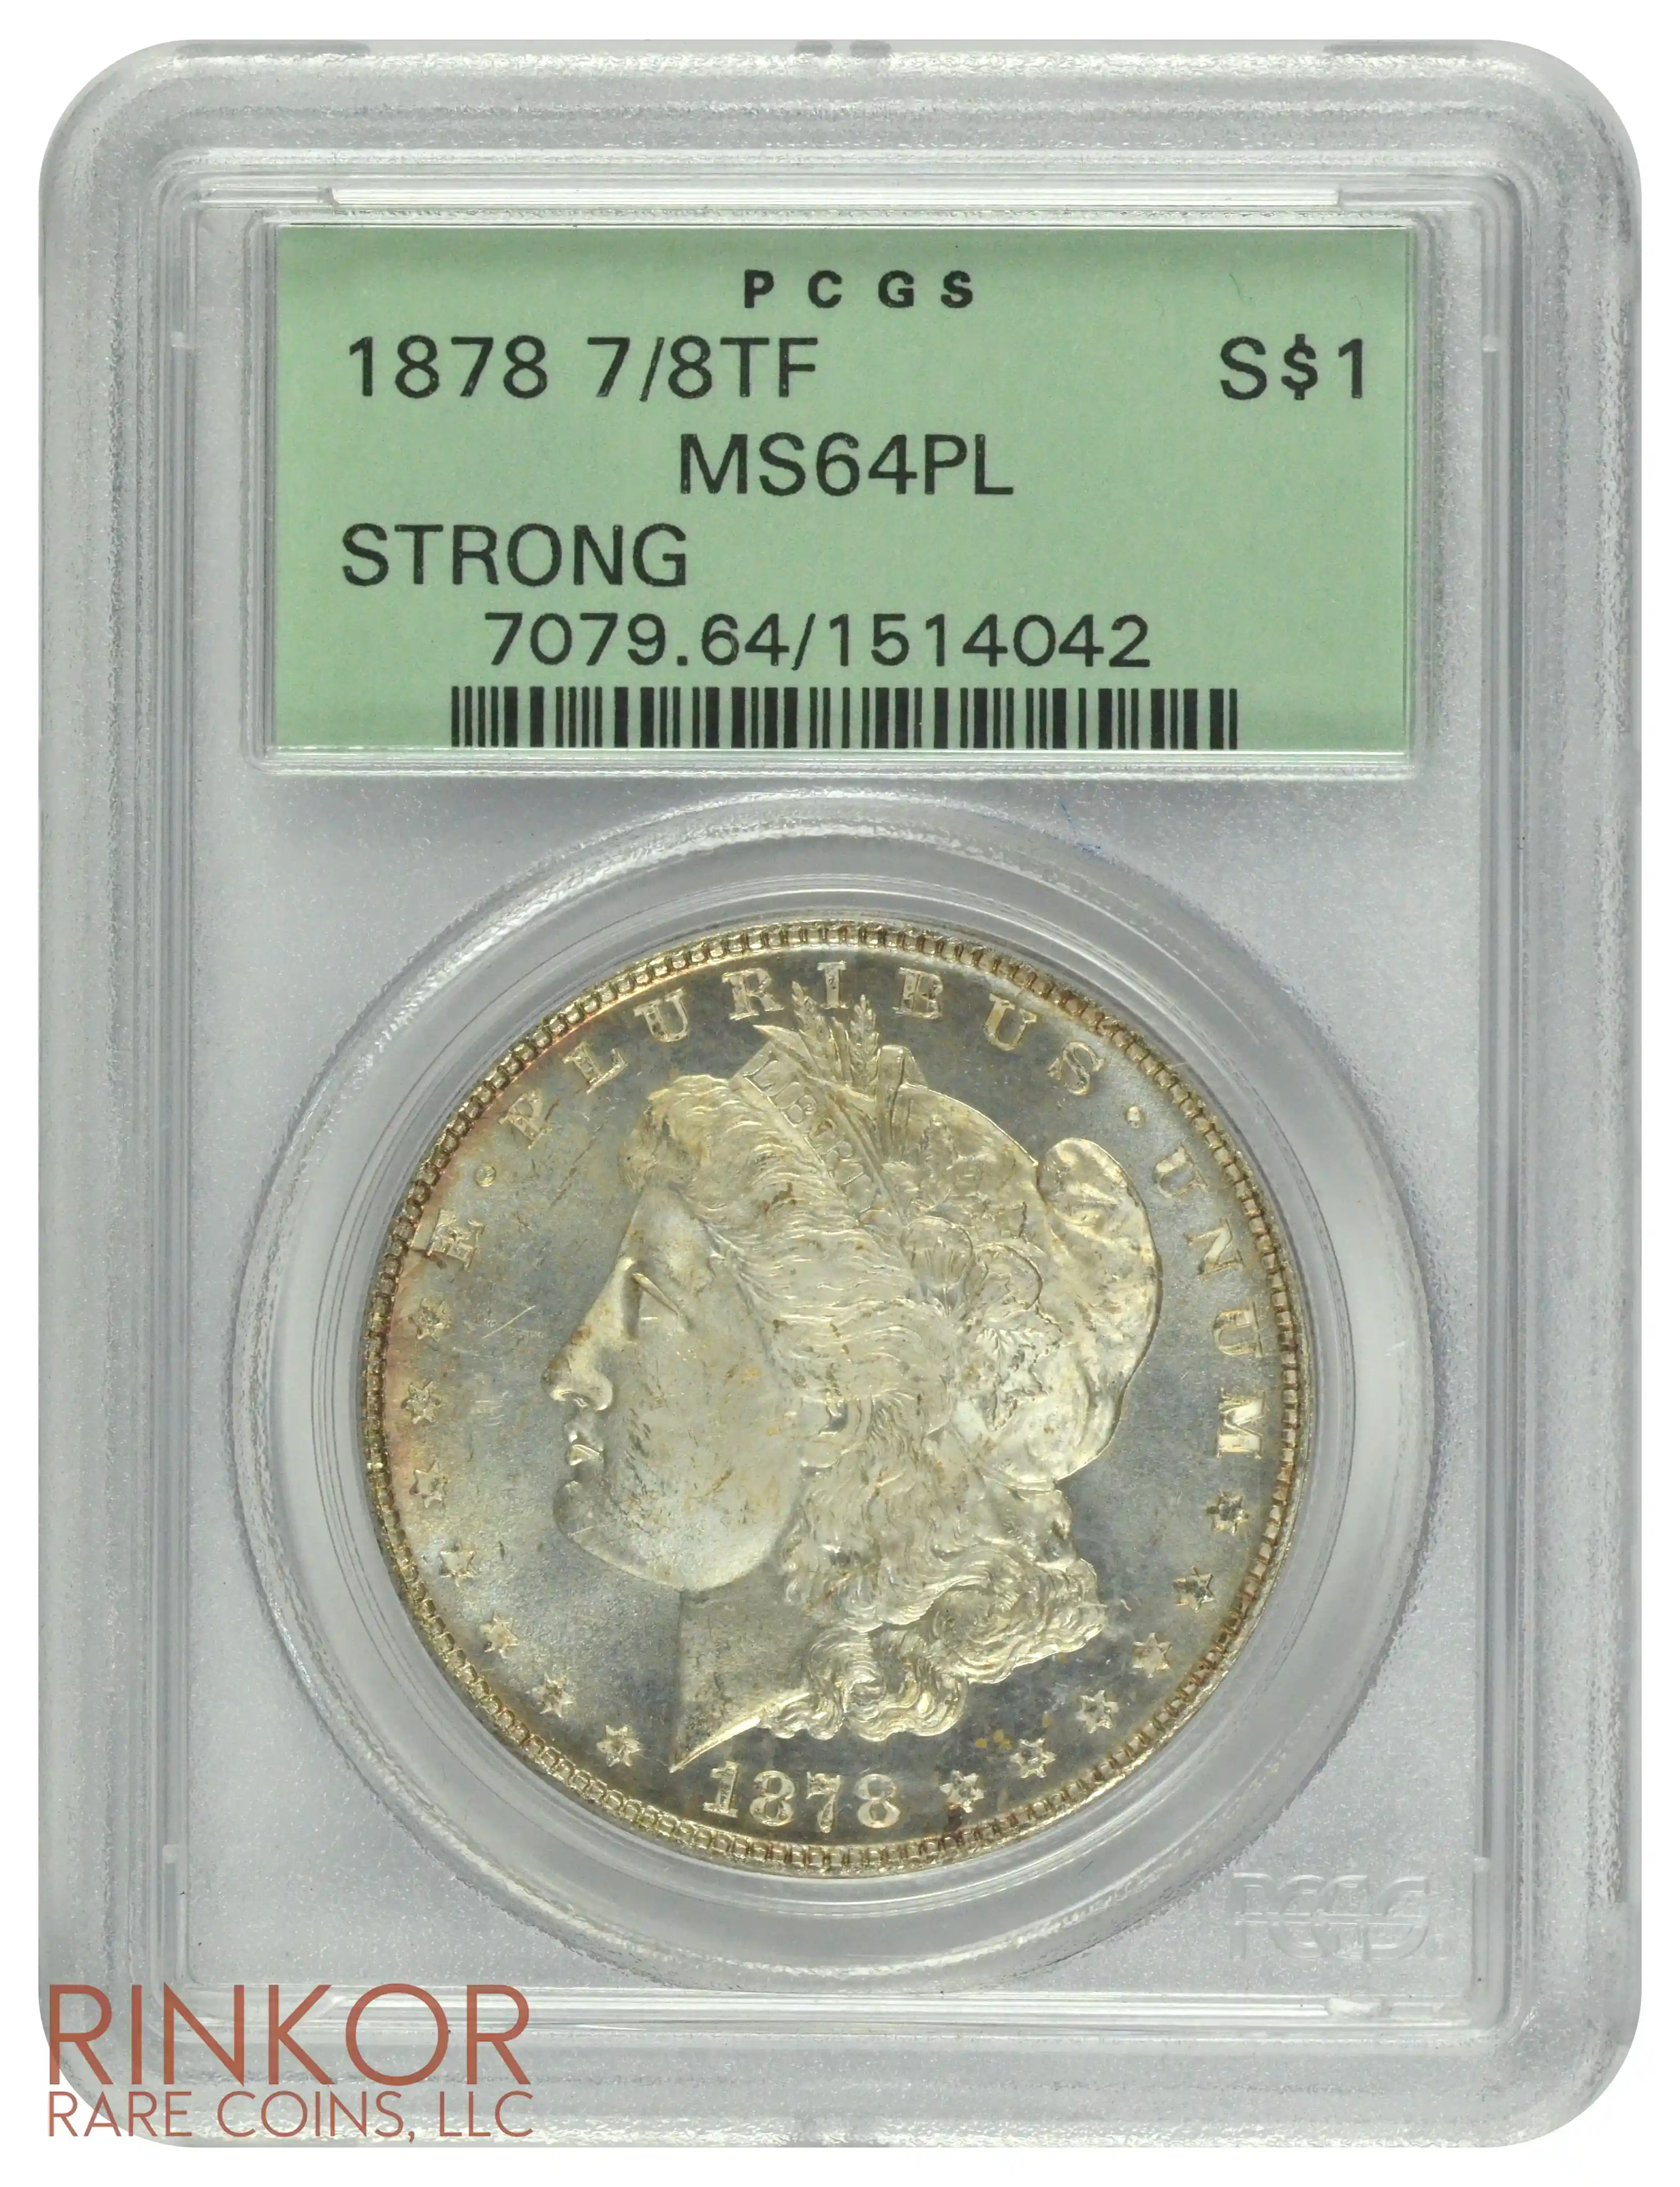 1878 7/8TF Strong $1 PCGS MS 64 PL